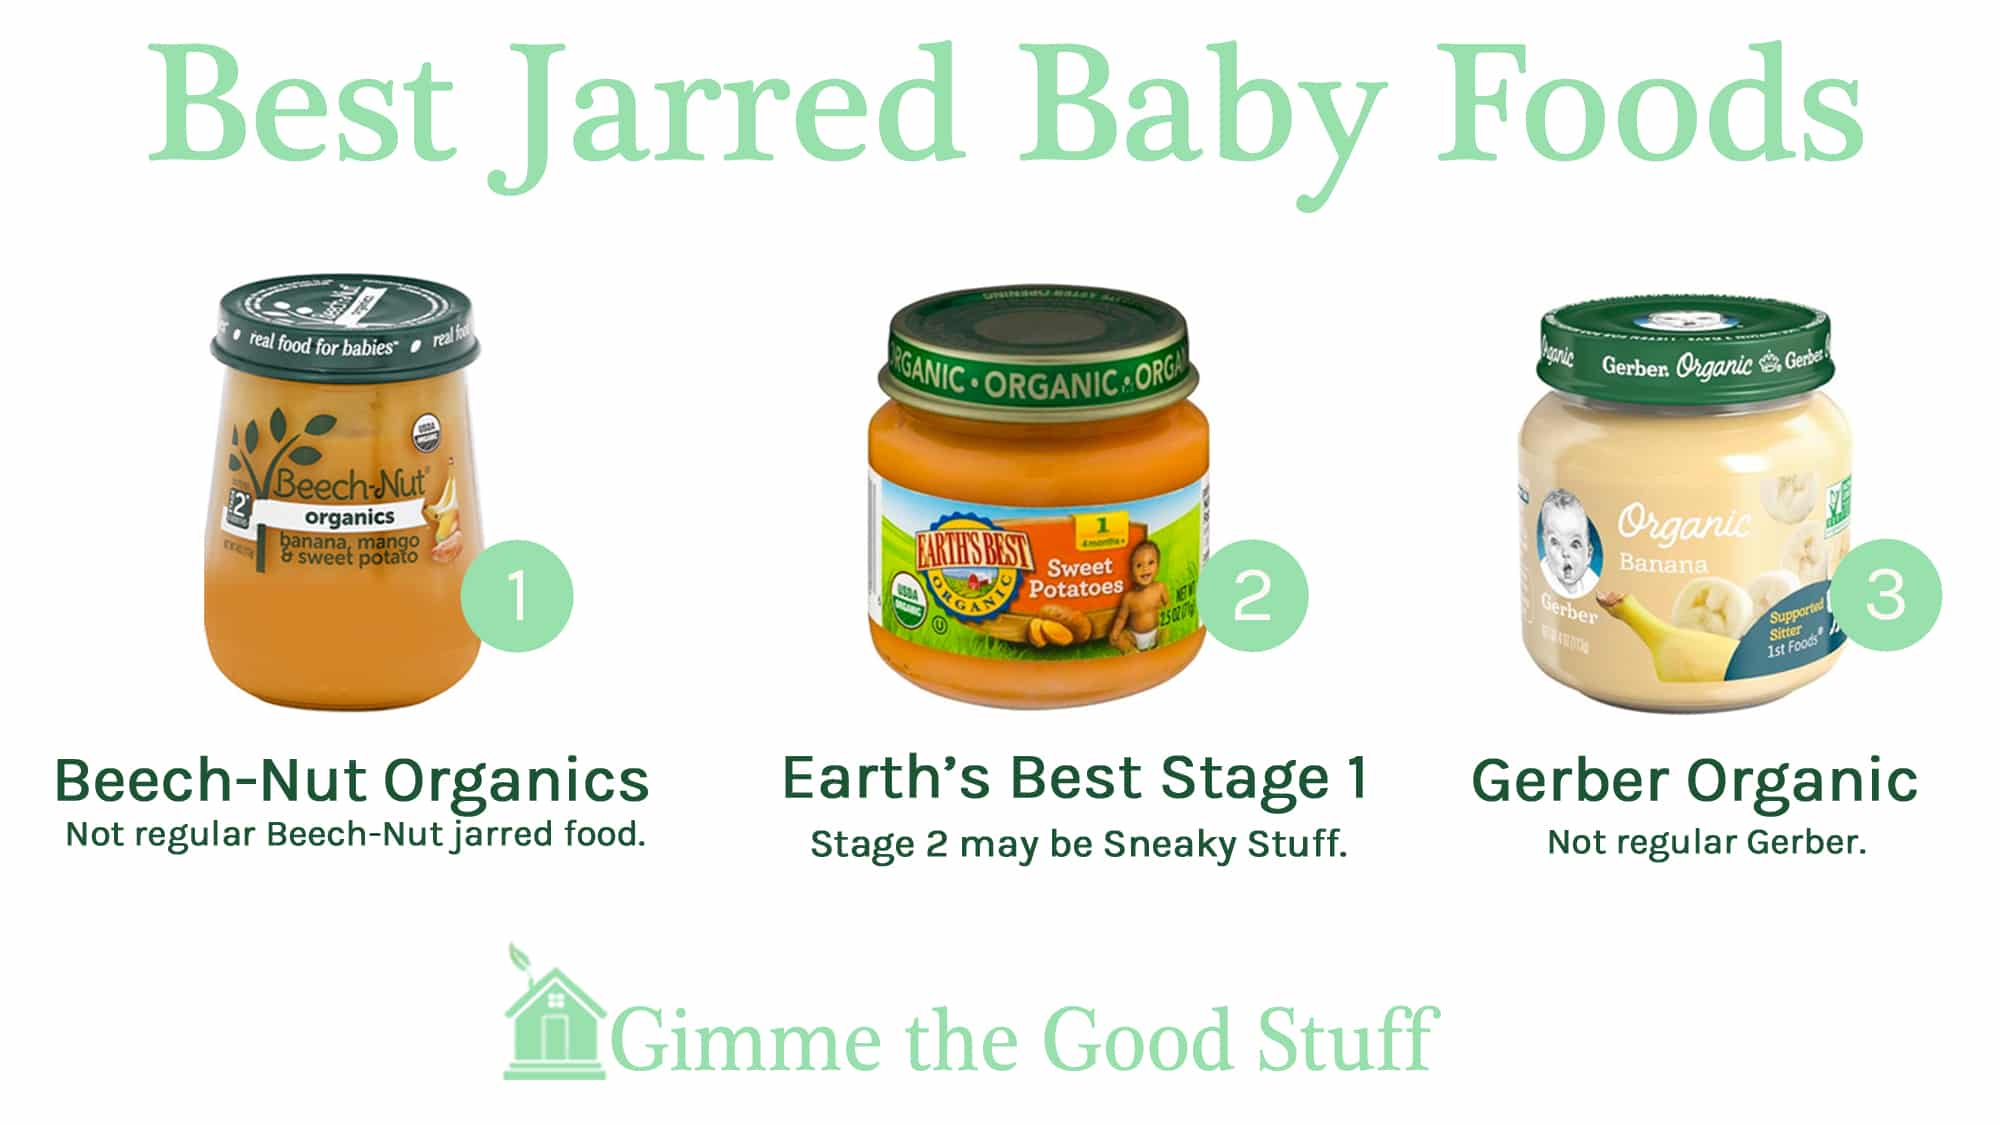 Cheap and healthy baby food options